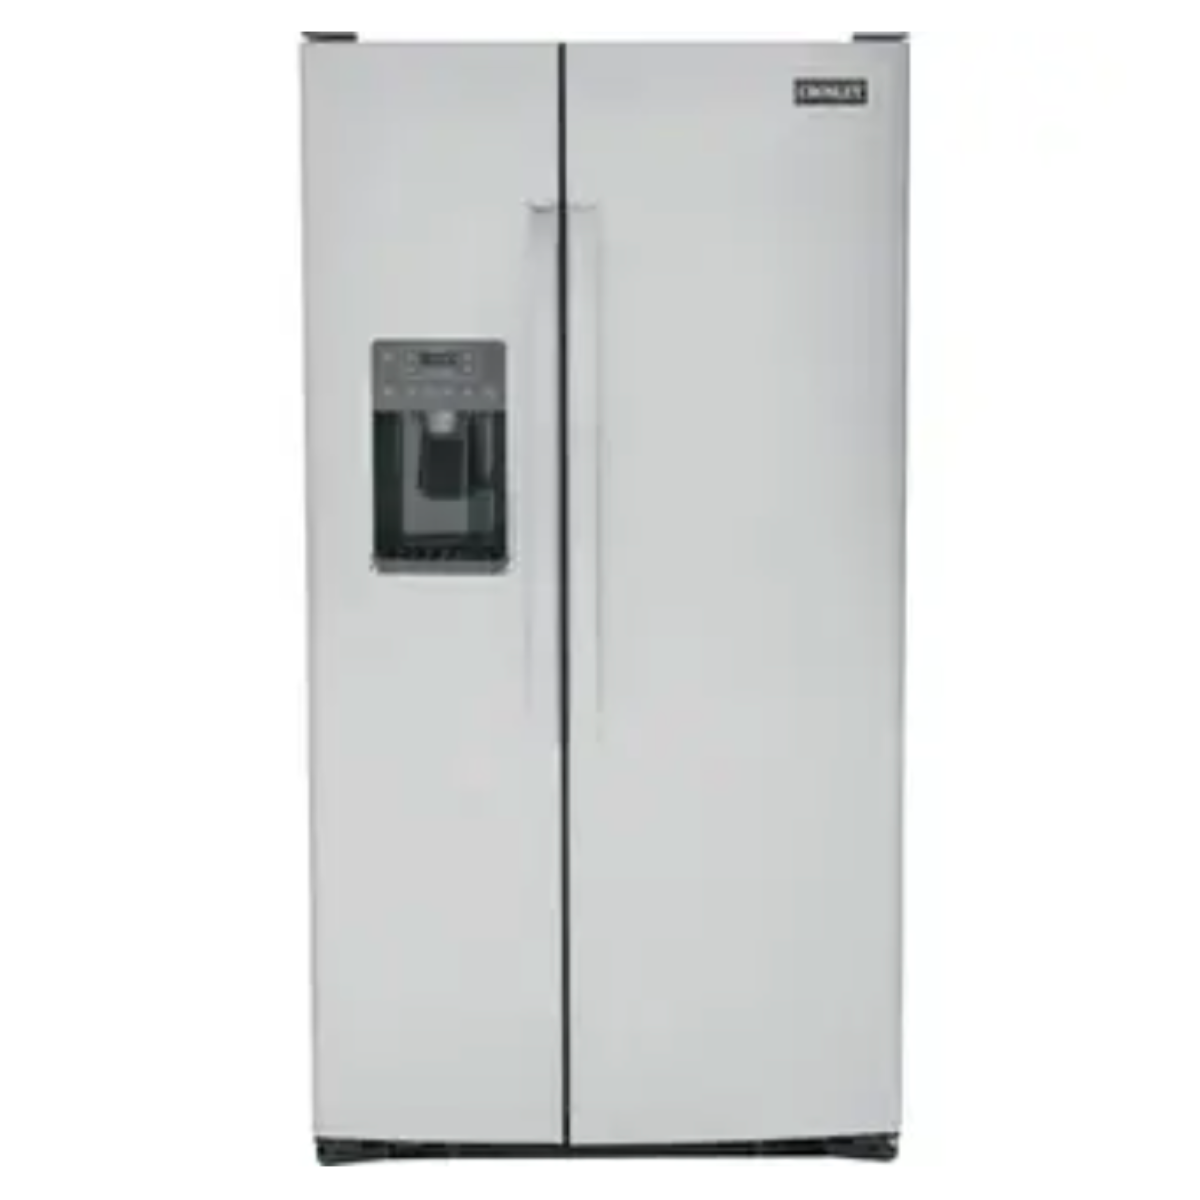 Crosley Stainless Steel 25.3 cu. ft. XSS25GYPFS Glass Shelf Side by Side Ice and Water Refrigerator $1275.00 90 Days Same as Cash*